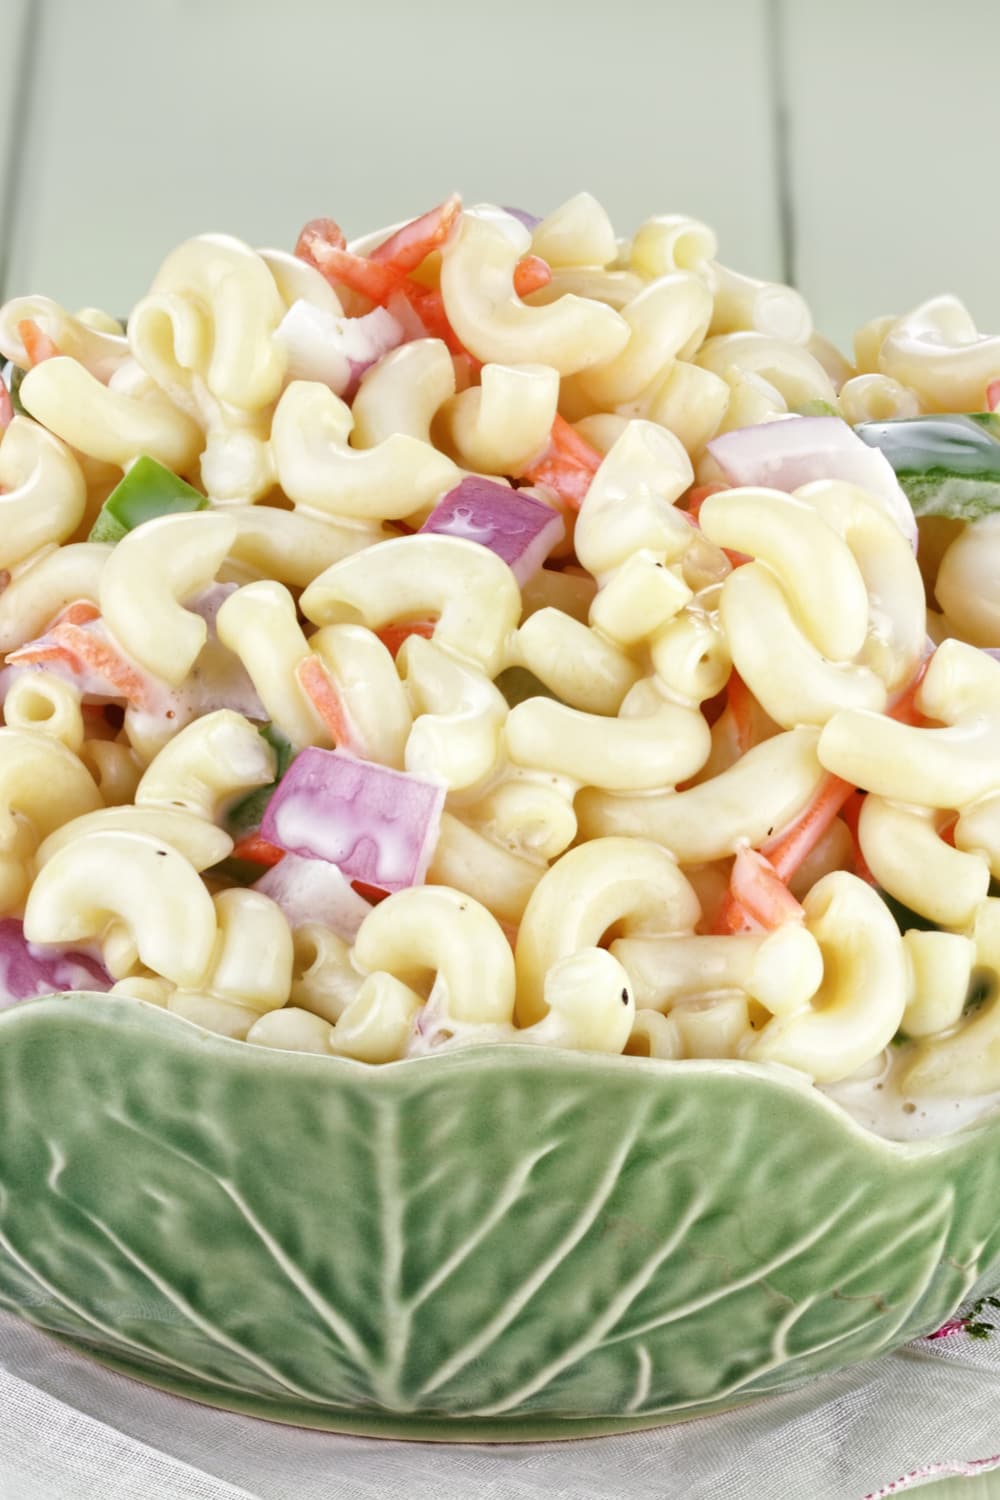 Macaroni salad with mayonnaise, onions, celery, red pepper, and dill pickle relish. 